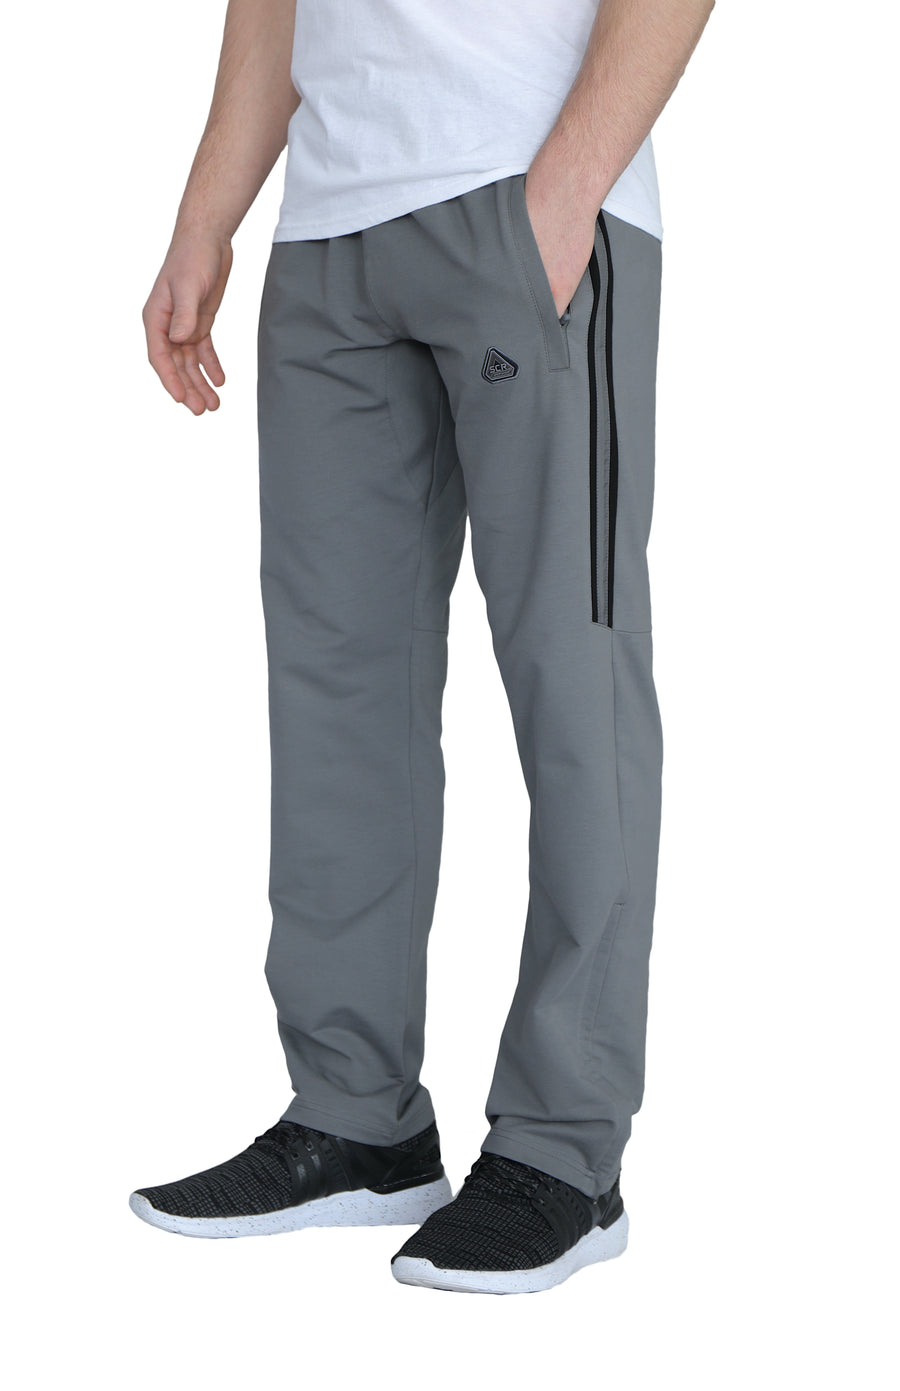 ScR SPORTSWEAR Mens Sweatpants Tapered Slim Workout Athletic Running  Joggers Activewear Lounge Pants with 30 L Inseam (M X 30L, Heather  grey-K536)